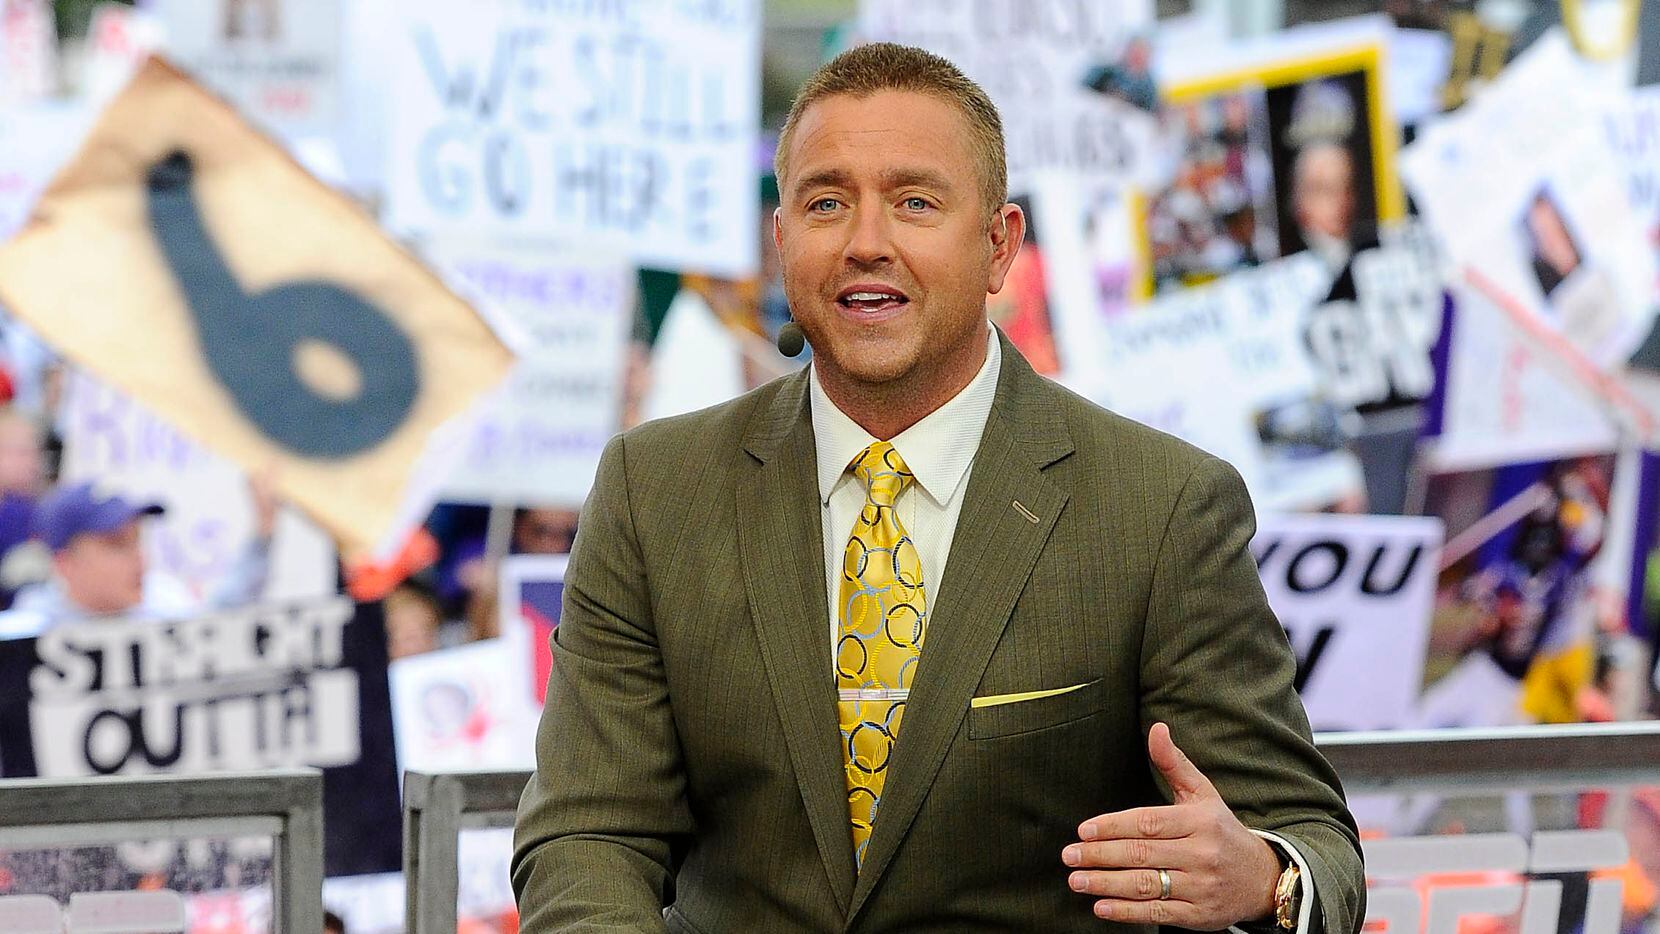 ESPN college football analyst Kirk Herbstreit says Baylor still on its quest for national...